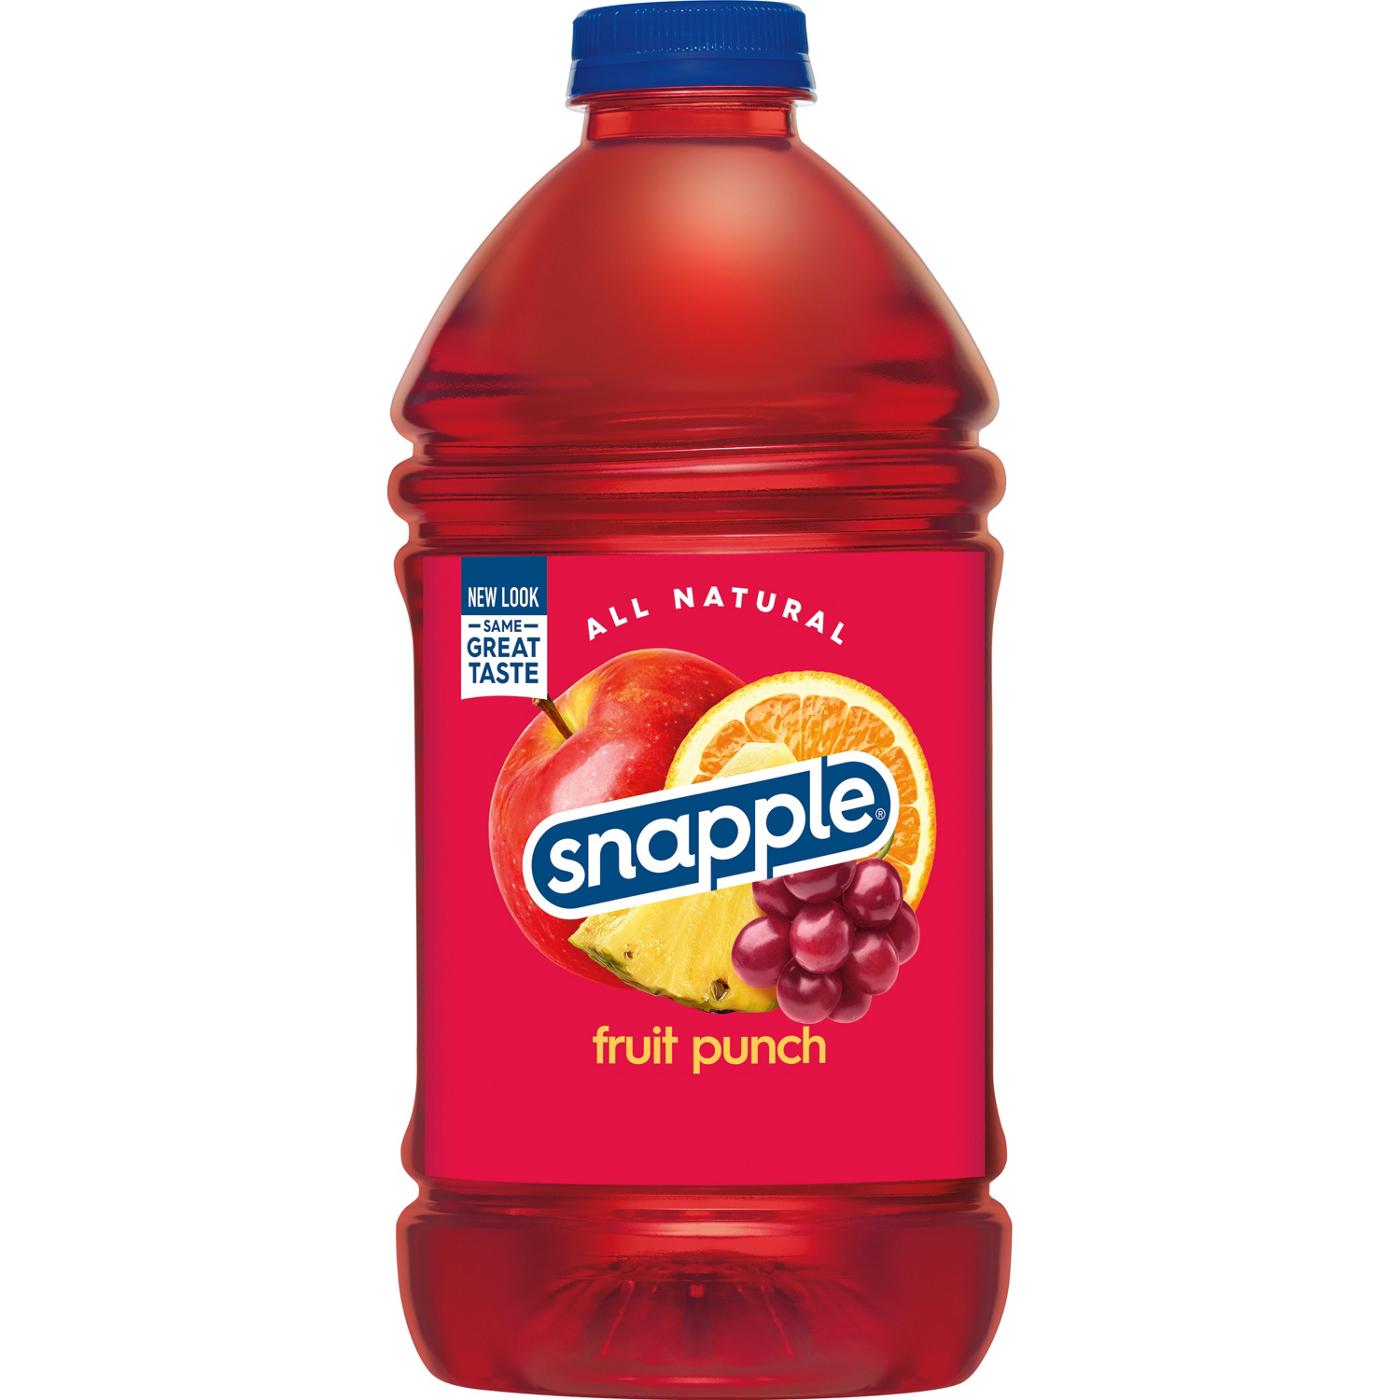 Snapple Fruit Punch; image 1 of 4